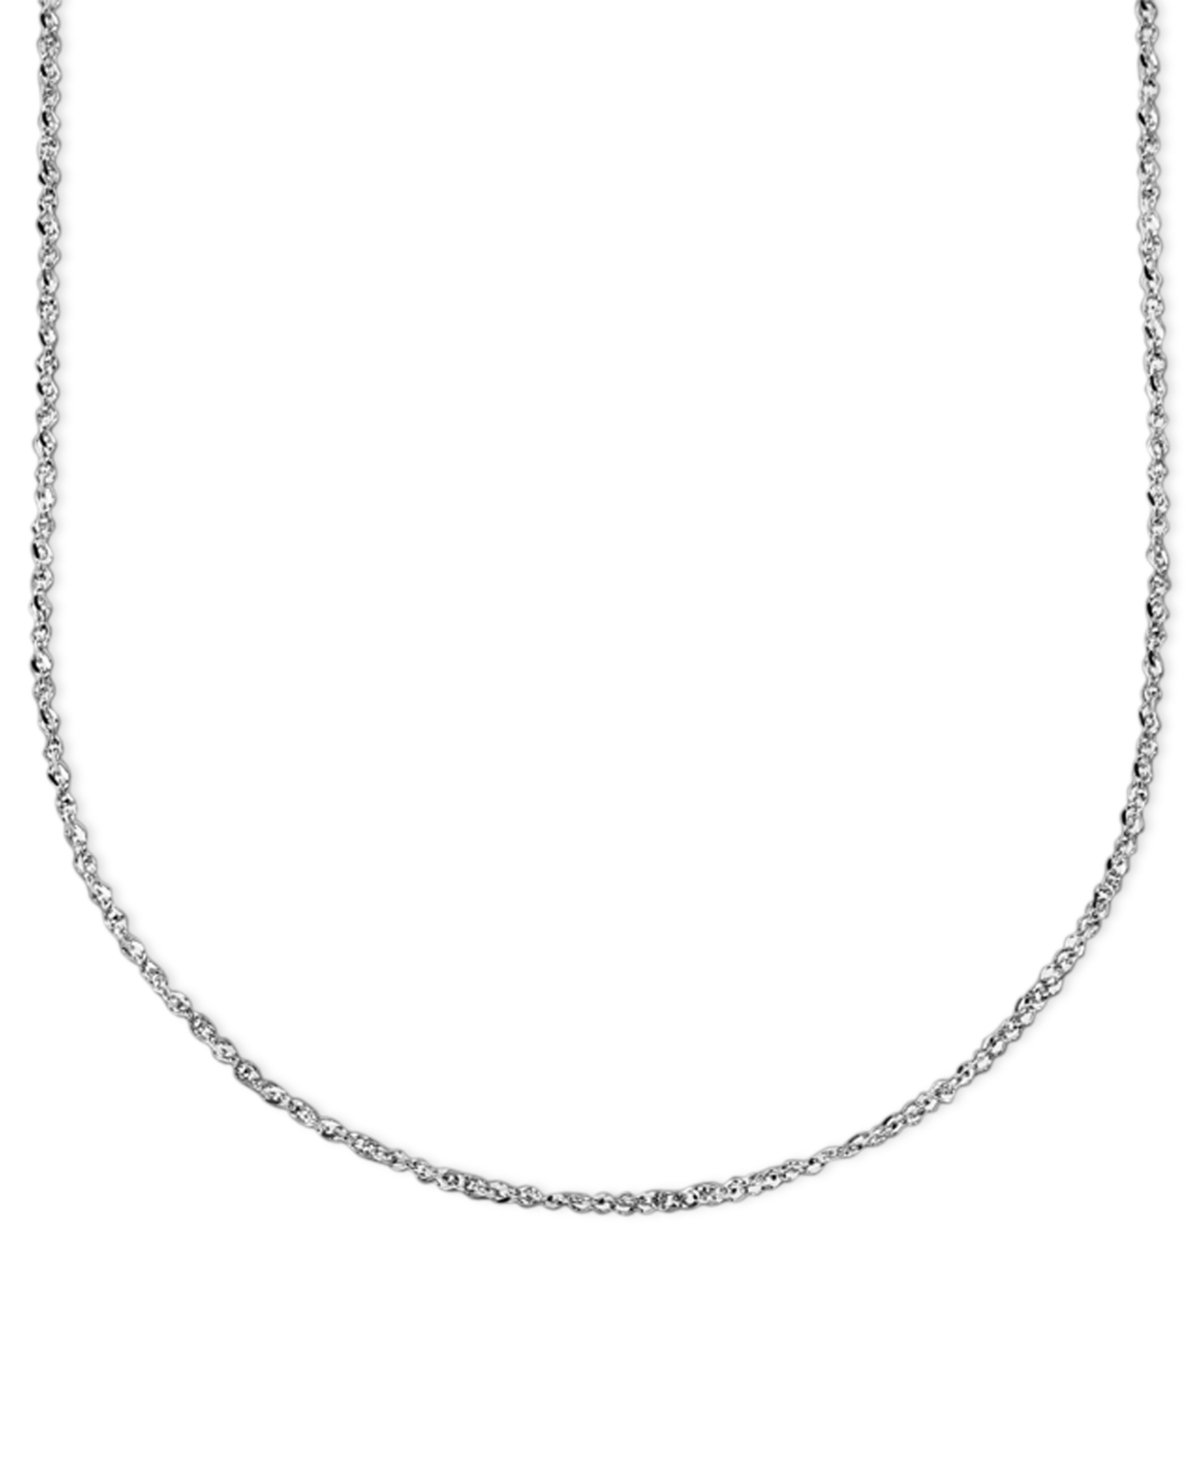 14k White Gold 16" Perfectina Chain Necklace (1-1/8mm) - White Gold